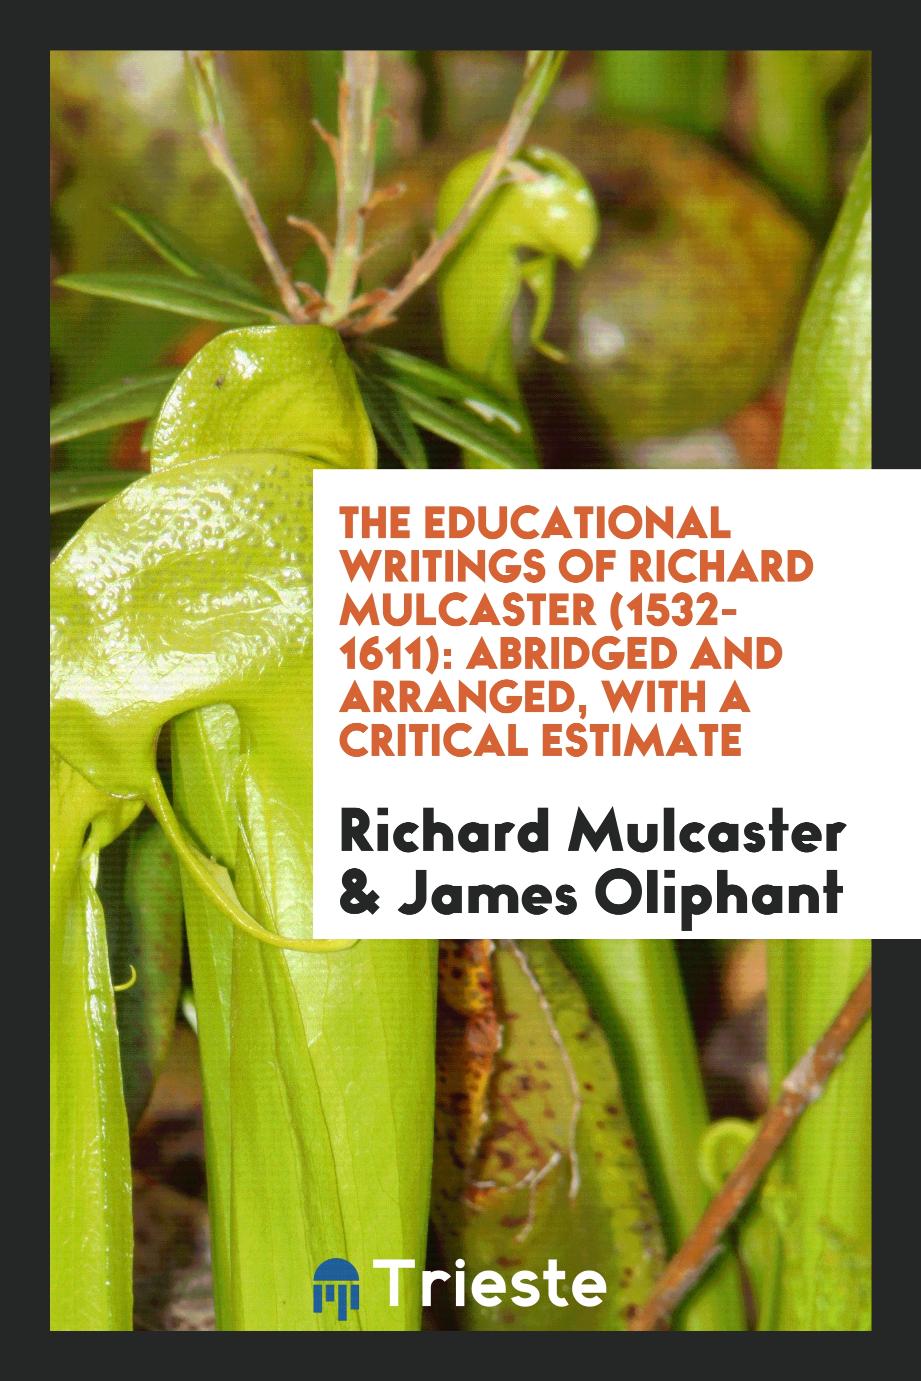 The Educational Writings of Richard Mulcaster (1532-1611): Abridged and Arranged, with a Critical Estimate